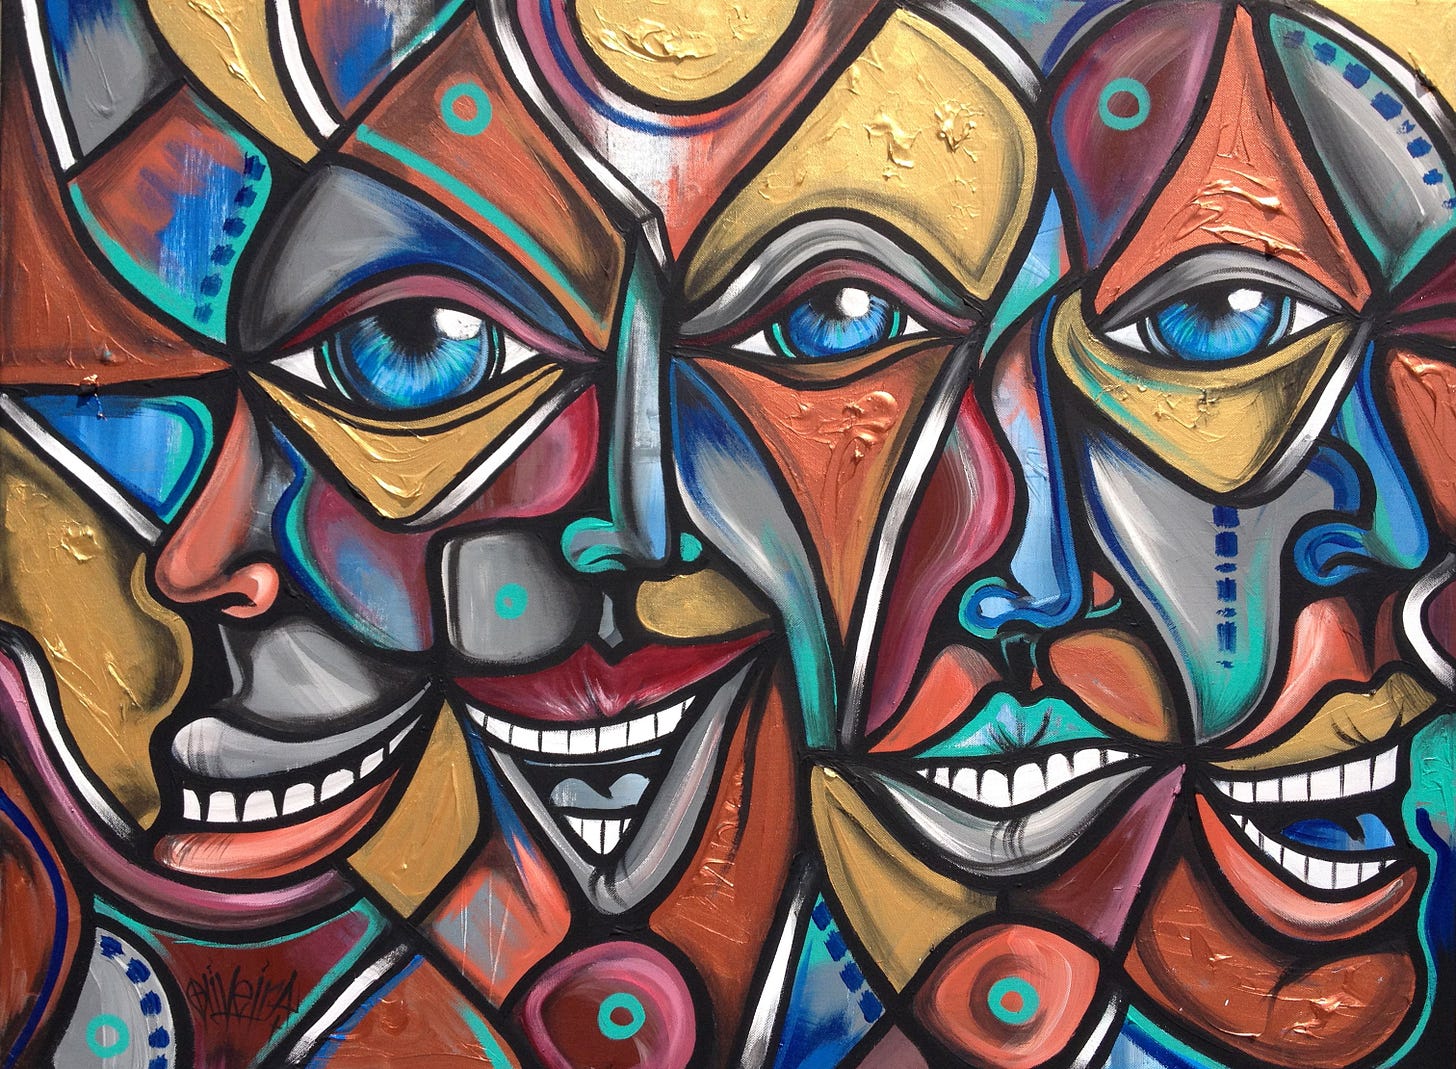 The Choice of Laughter" 30" x 40" - acrylic on canvas. Joshua Oliveira |  Abstract face art, Art, Cubism art